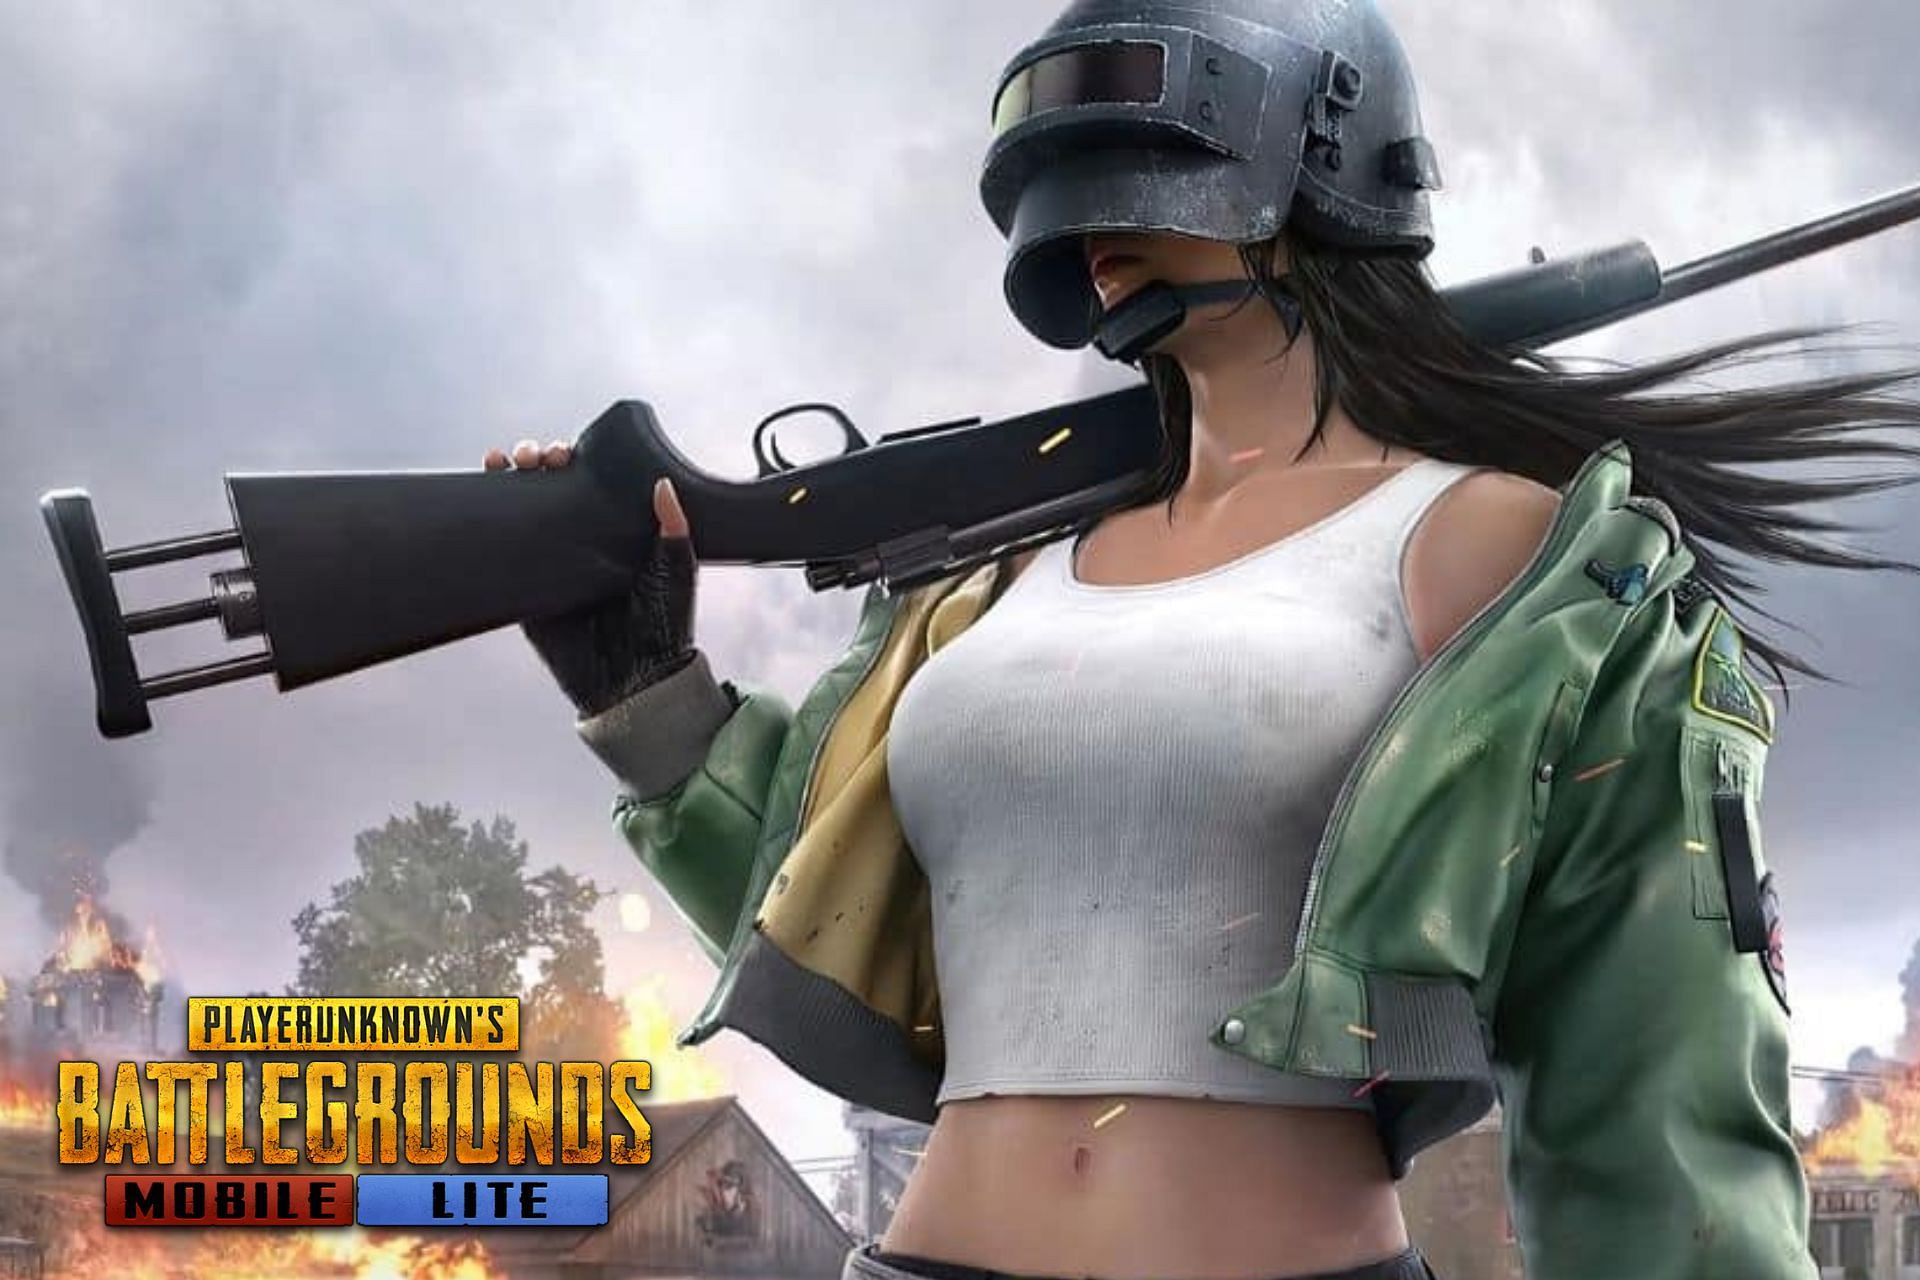 PUBG Mobile Lite latest 0.24.0 update: How to download, APK link